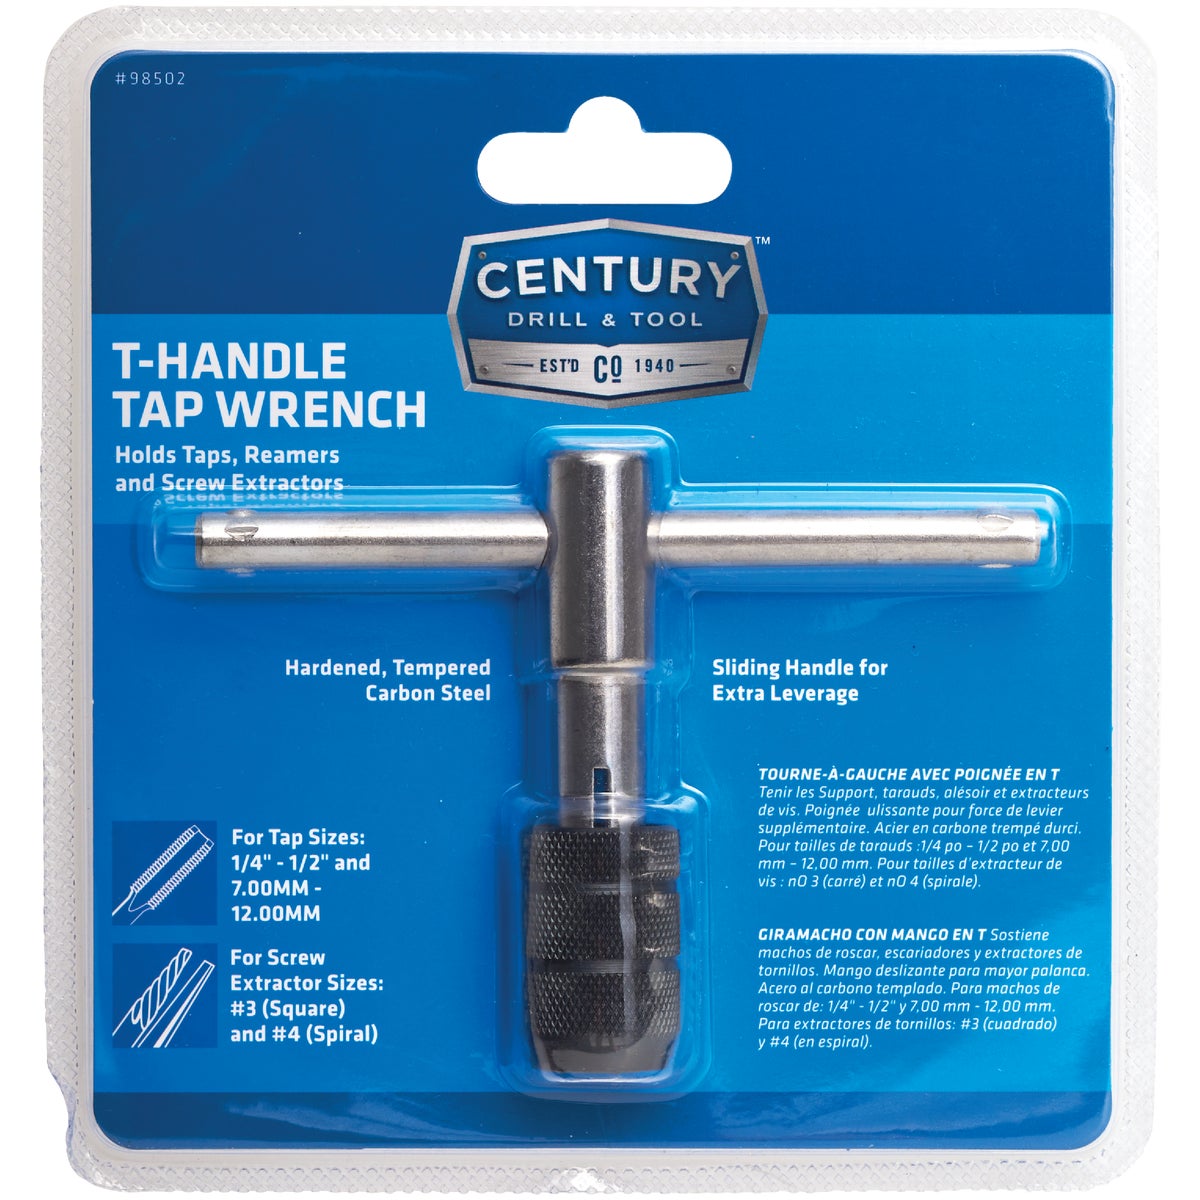 Century Drill & Tool 1/4 In. to 1/2 In. Tap Wrench T-Handle